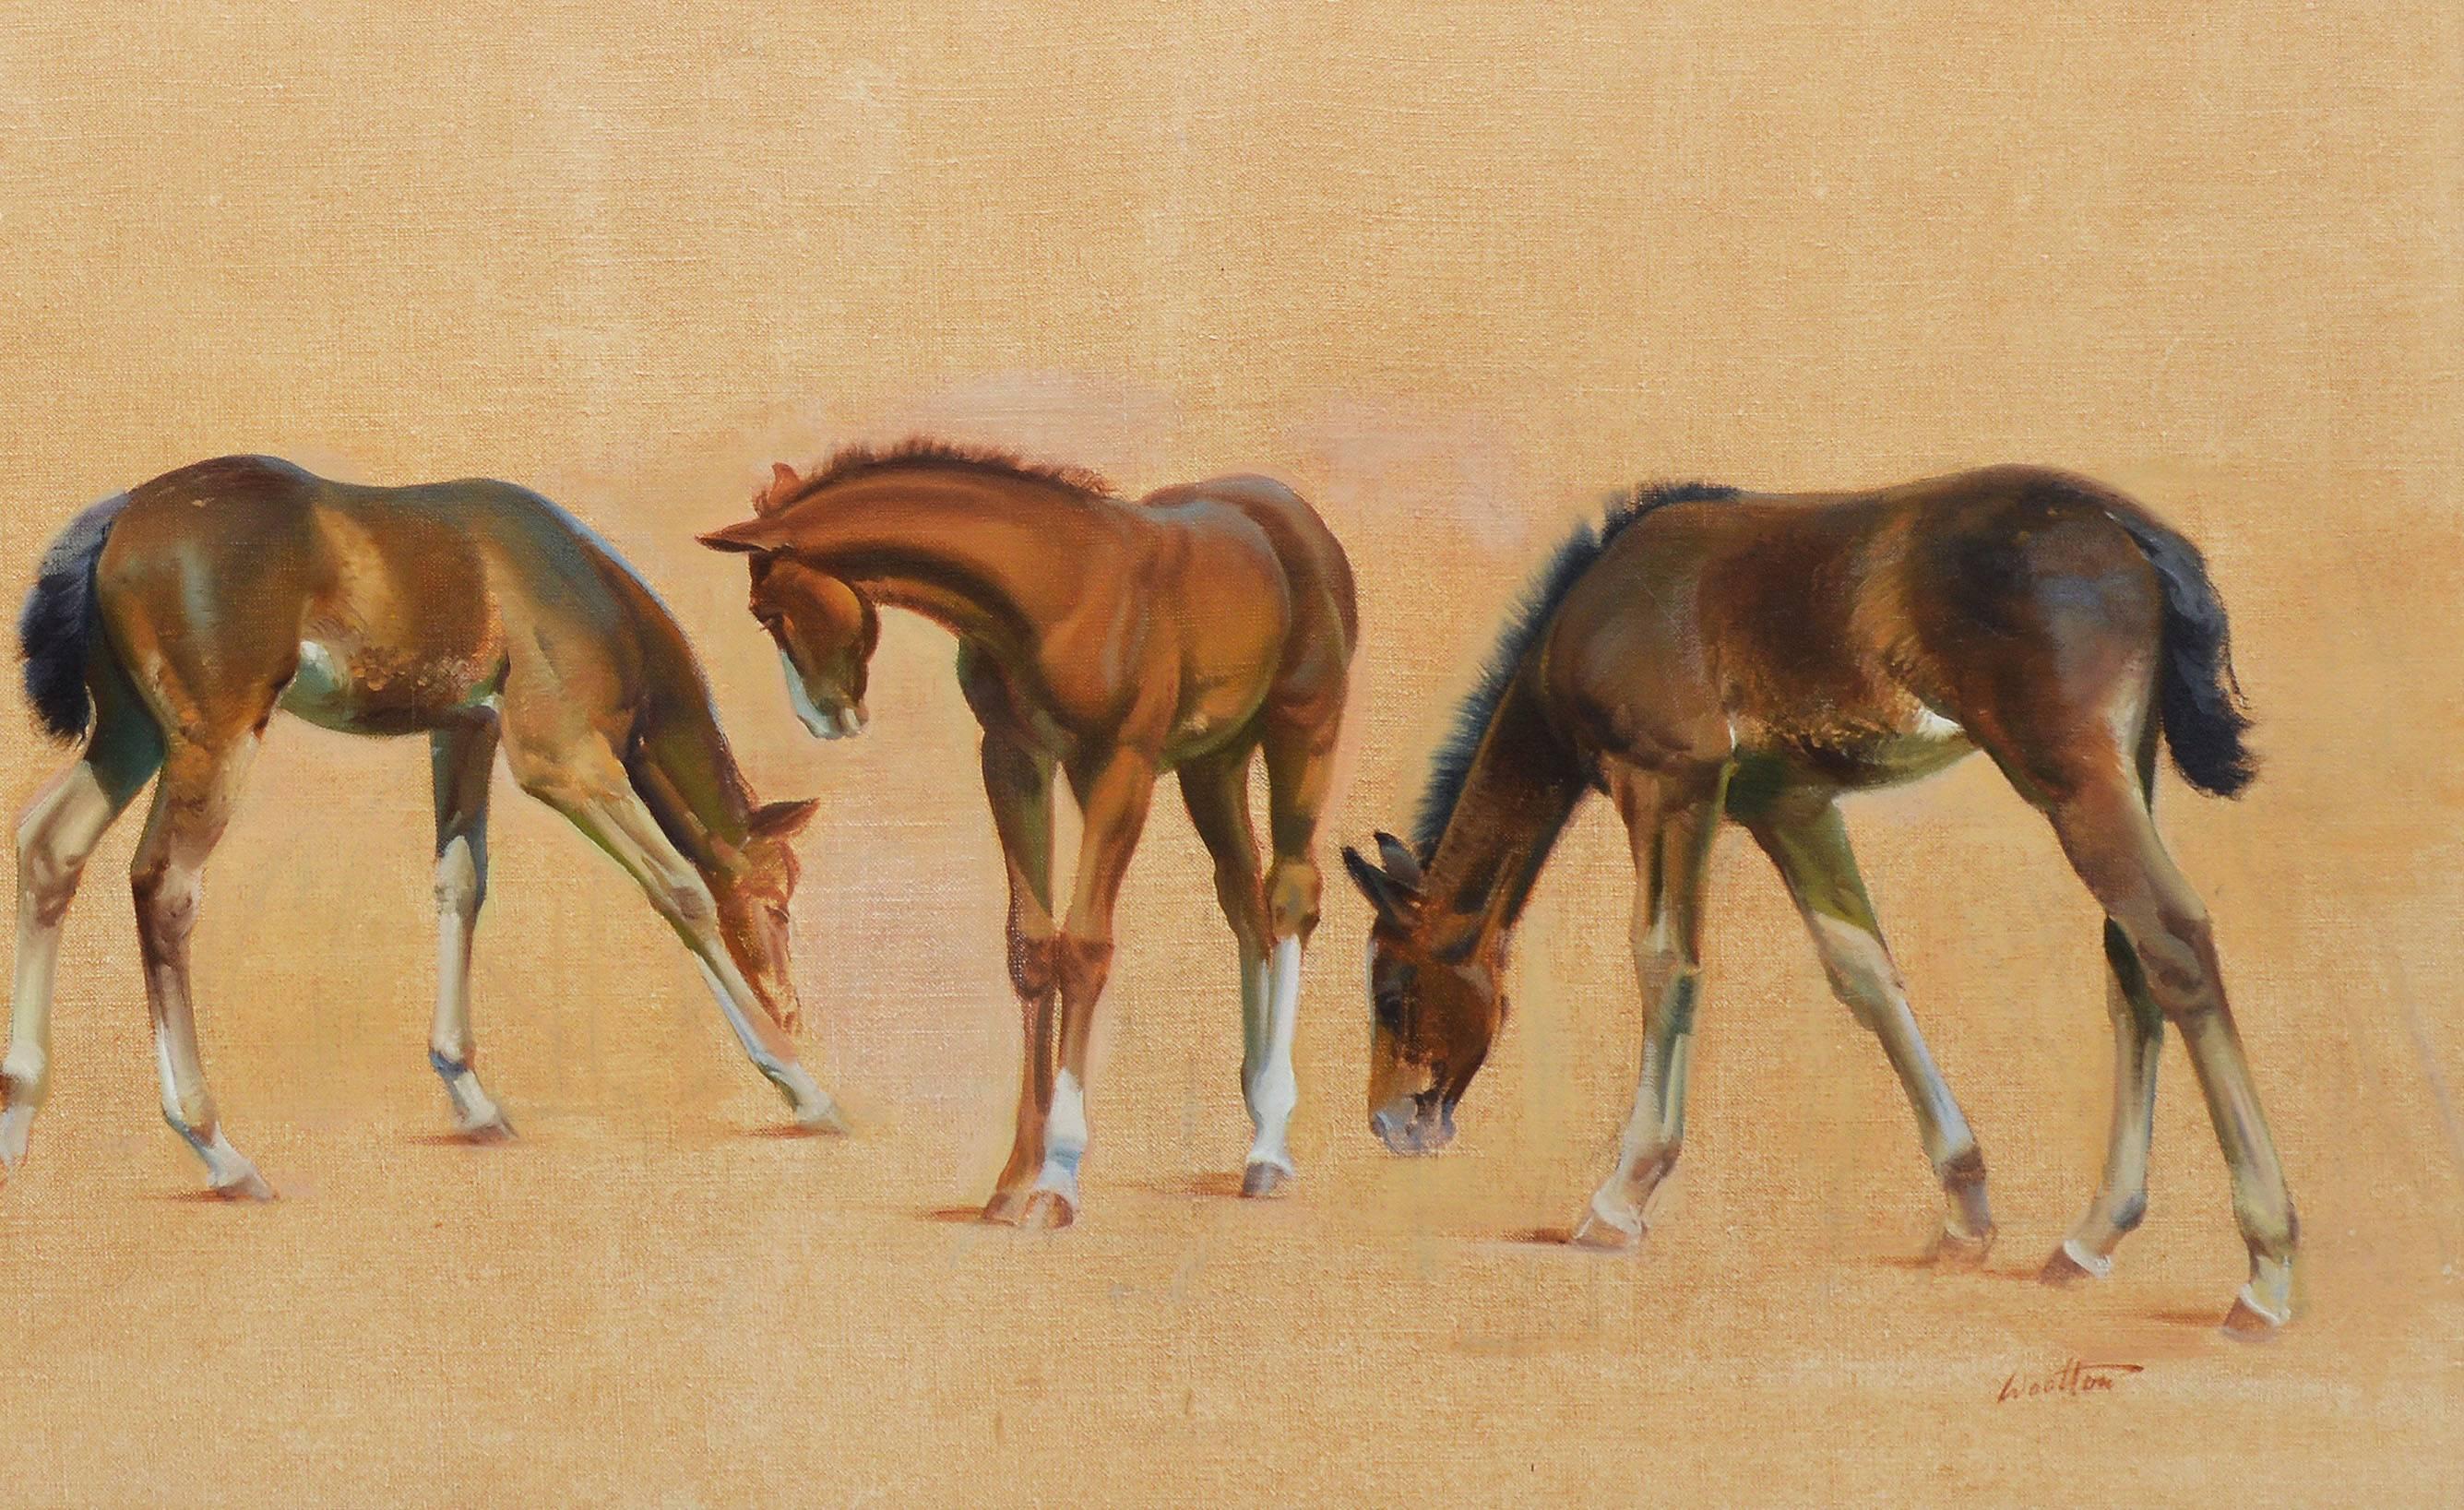 Original oil painting of horses by Walt Wooten (b.1939).  Oil on canvas, circa 1970.  Signed lower right, "Wooten".  Displayed in a period giltwood frame.  Image size, 38"L x 17"H, overall 46"L x 25"H.